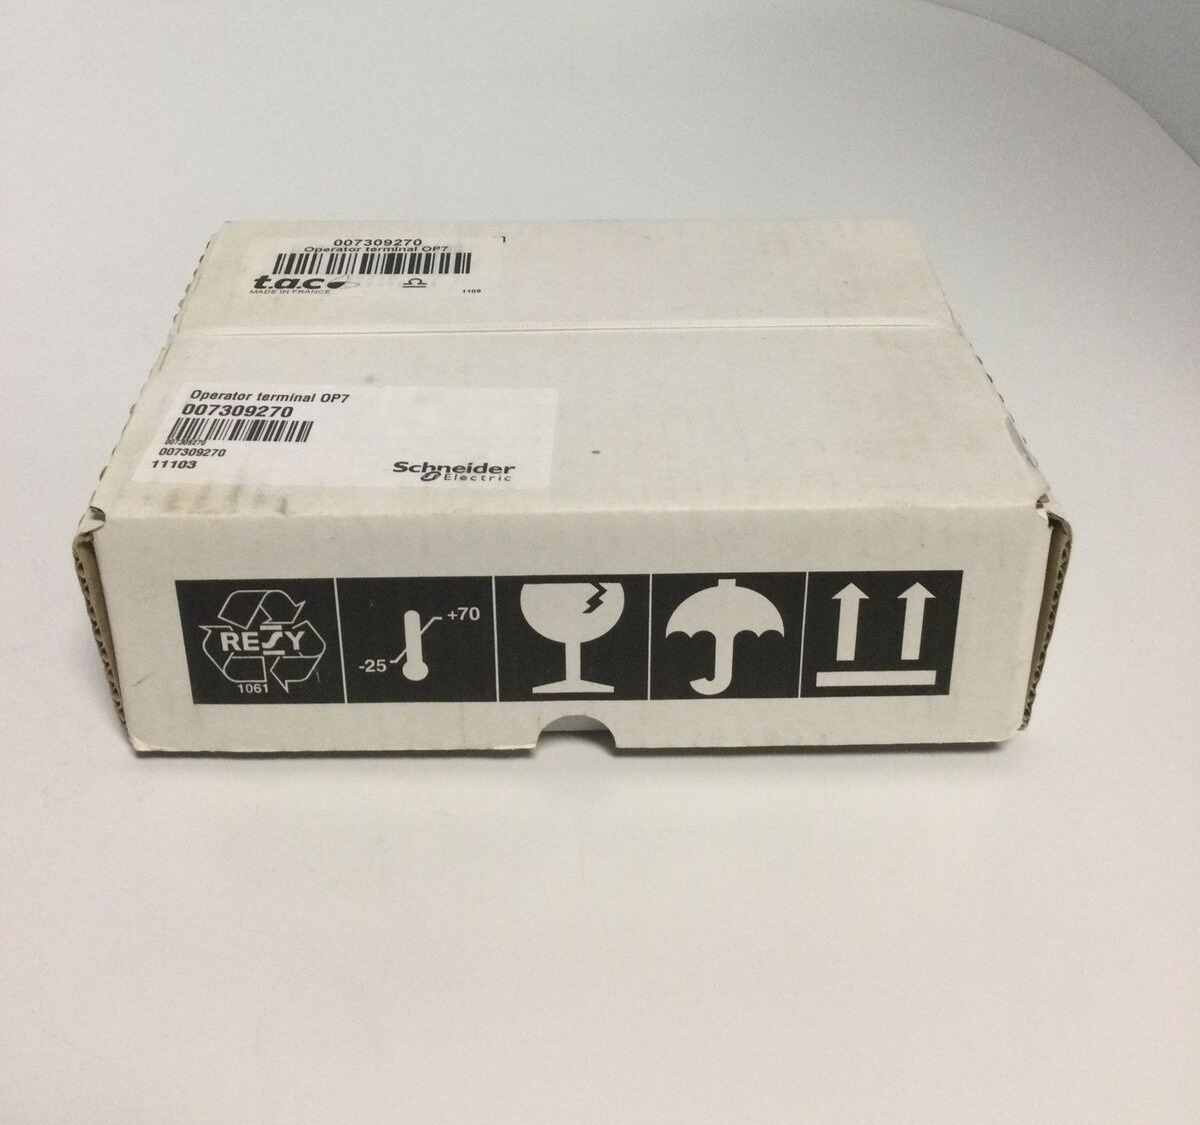 NEW, SEALED, T.A.C., 007309270, OPERATOR TERMINAL OP7. (10K-3)